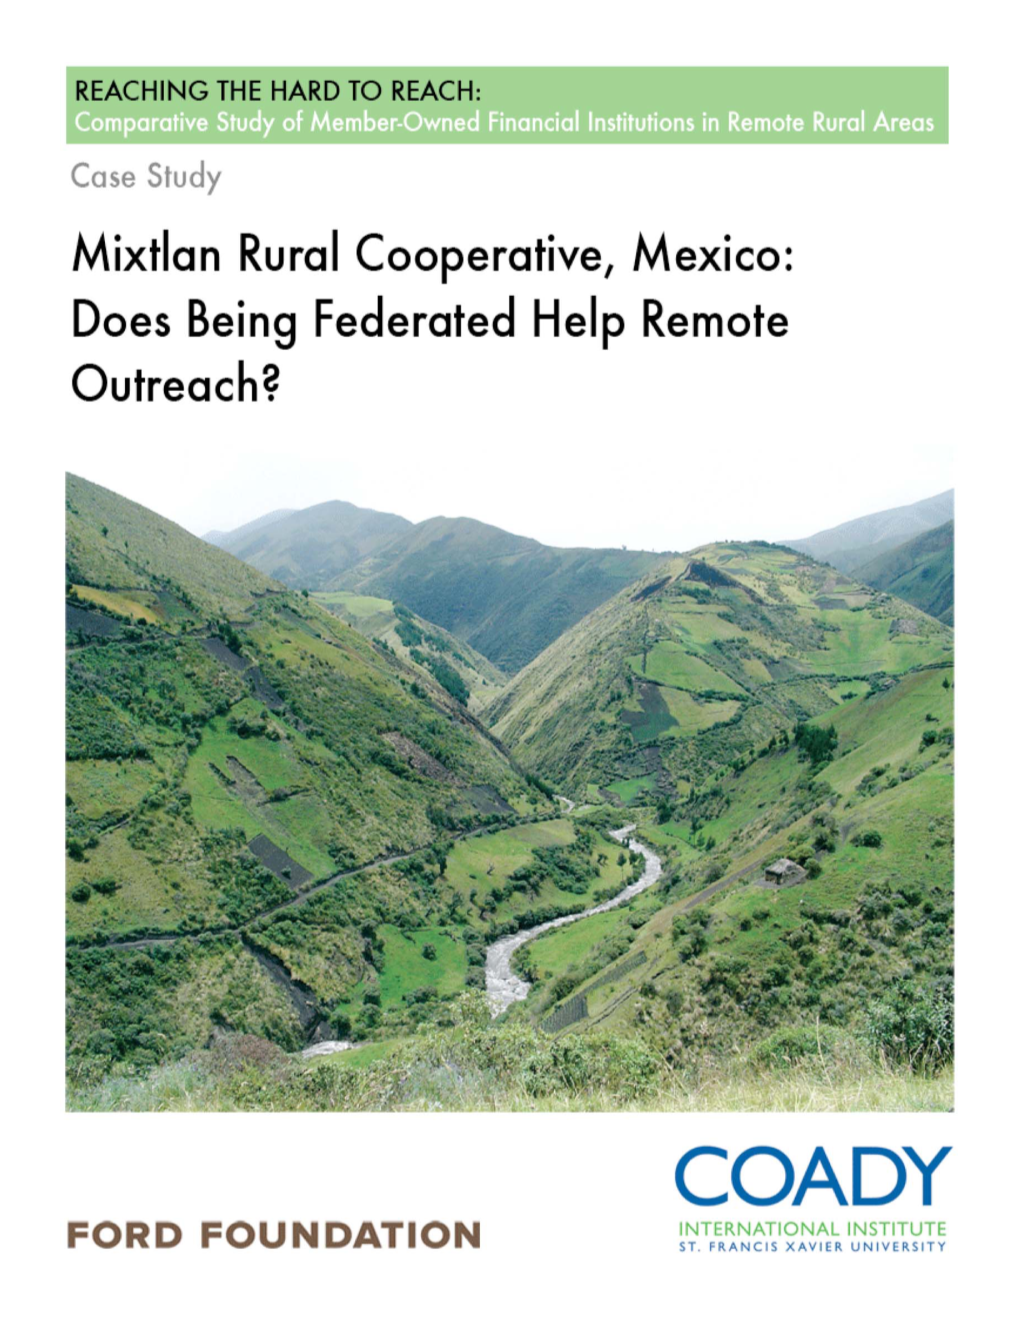 CASE of Mixtlan Rural Cooperative, Mexico: Does Being Federated Help Remote Outreach?